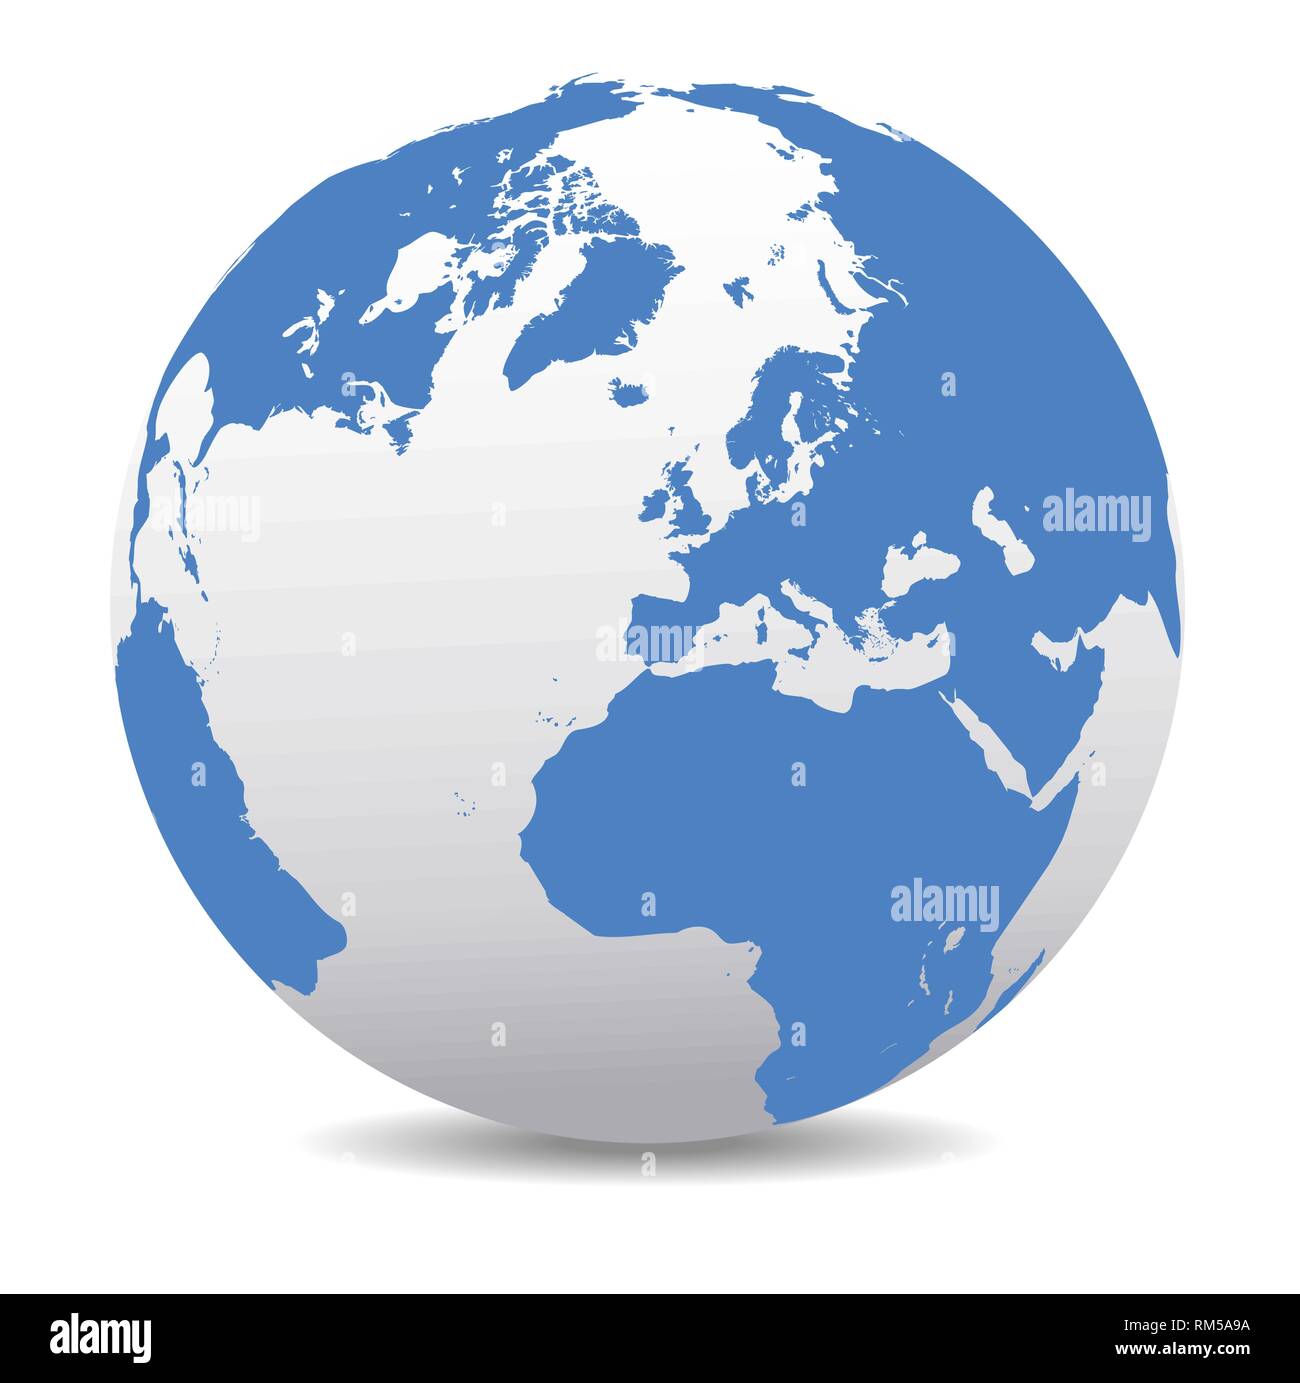 Europe, Russia and Africa, Global World, Vector Map Icon of the World Globe Stock Vector